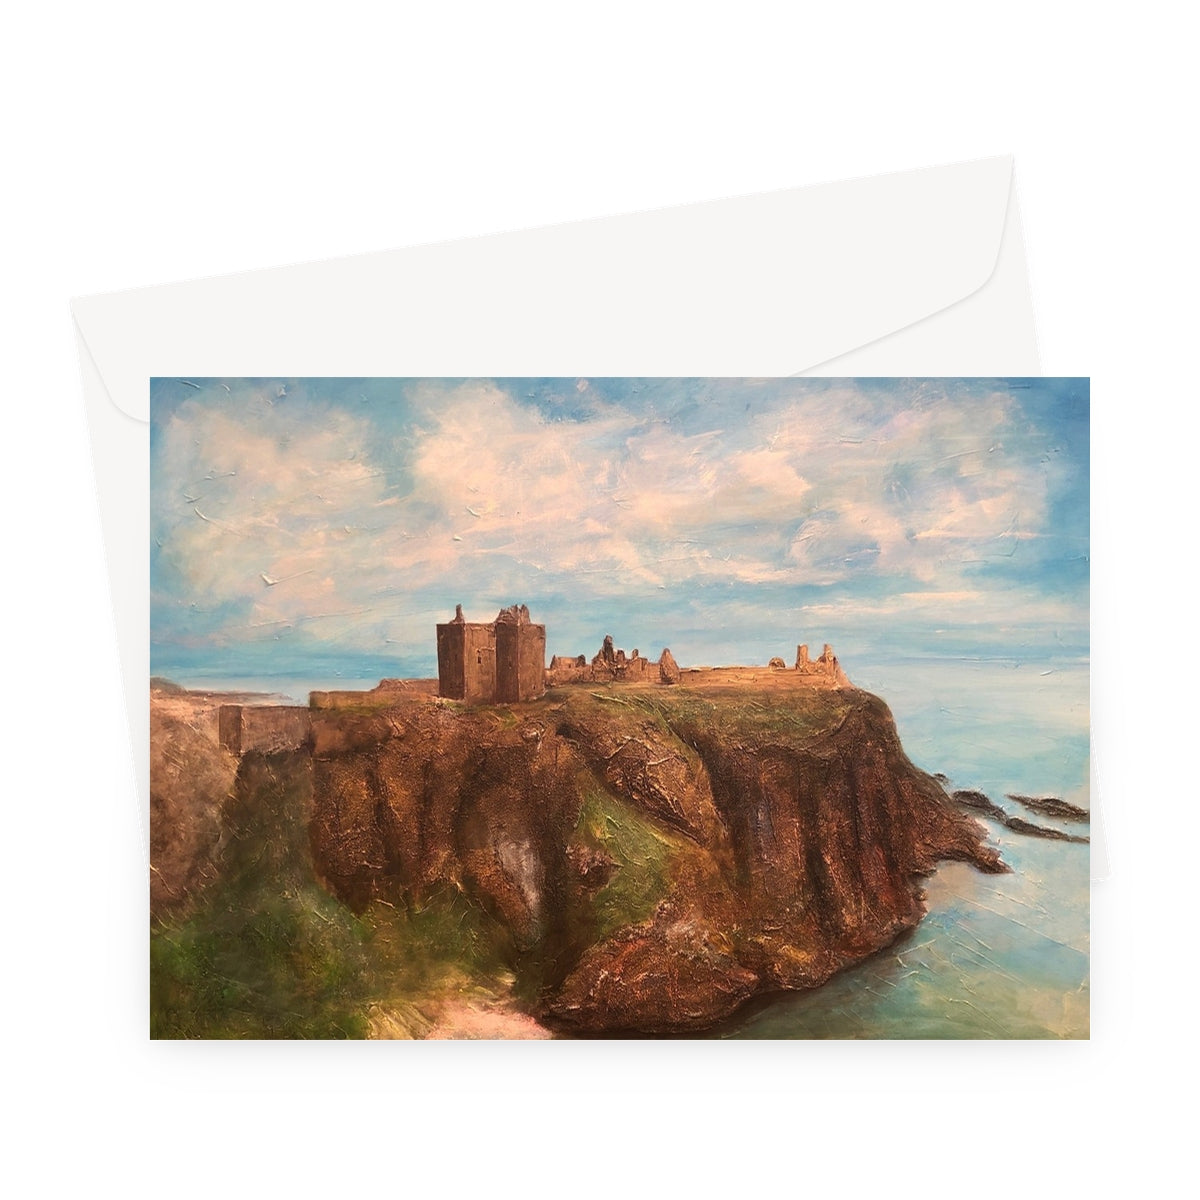 Dunnottar Castle Art Gifts Greeting Card-Stationery-Prodigi-A5 Landscape-1 Card-Paintings, Prints, Homeware, Art Gifts From Scotland By Scottish Artist Kevin Hunter